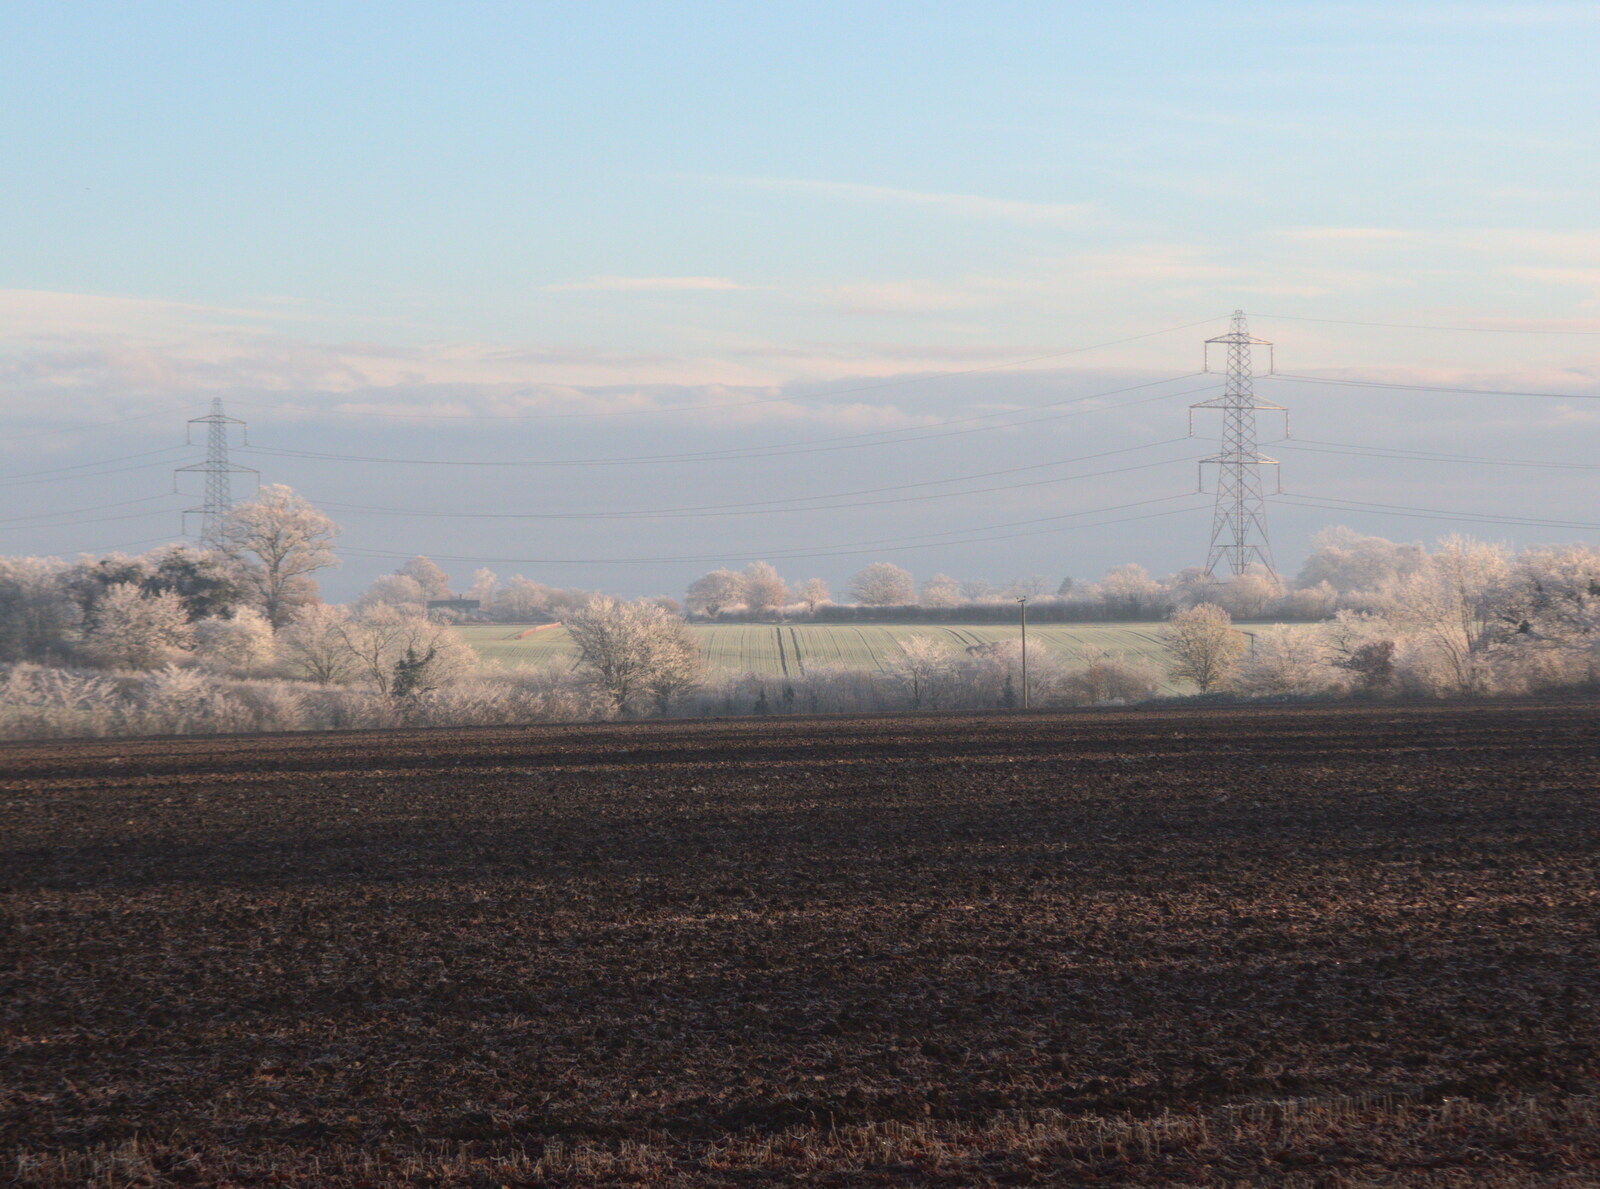 Frozen trees and pylons in the distance from More Frosty Rides and the Old Mink Sheds, Brome, Suffolk - 10th December 2020